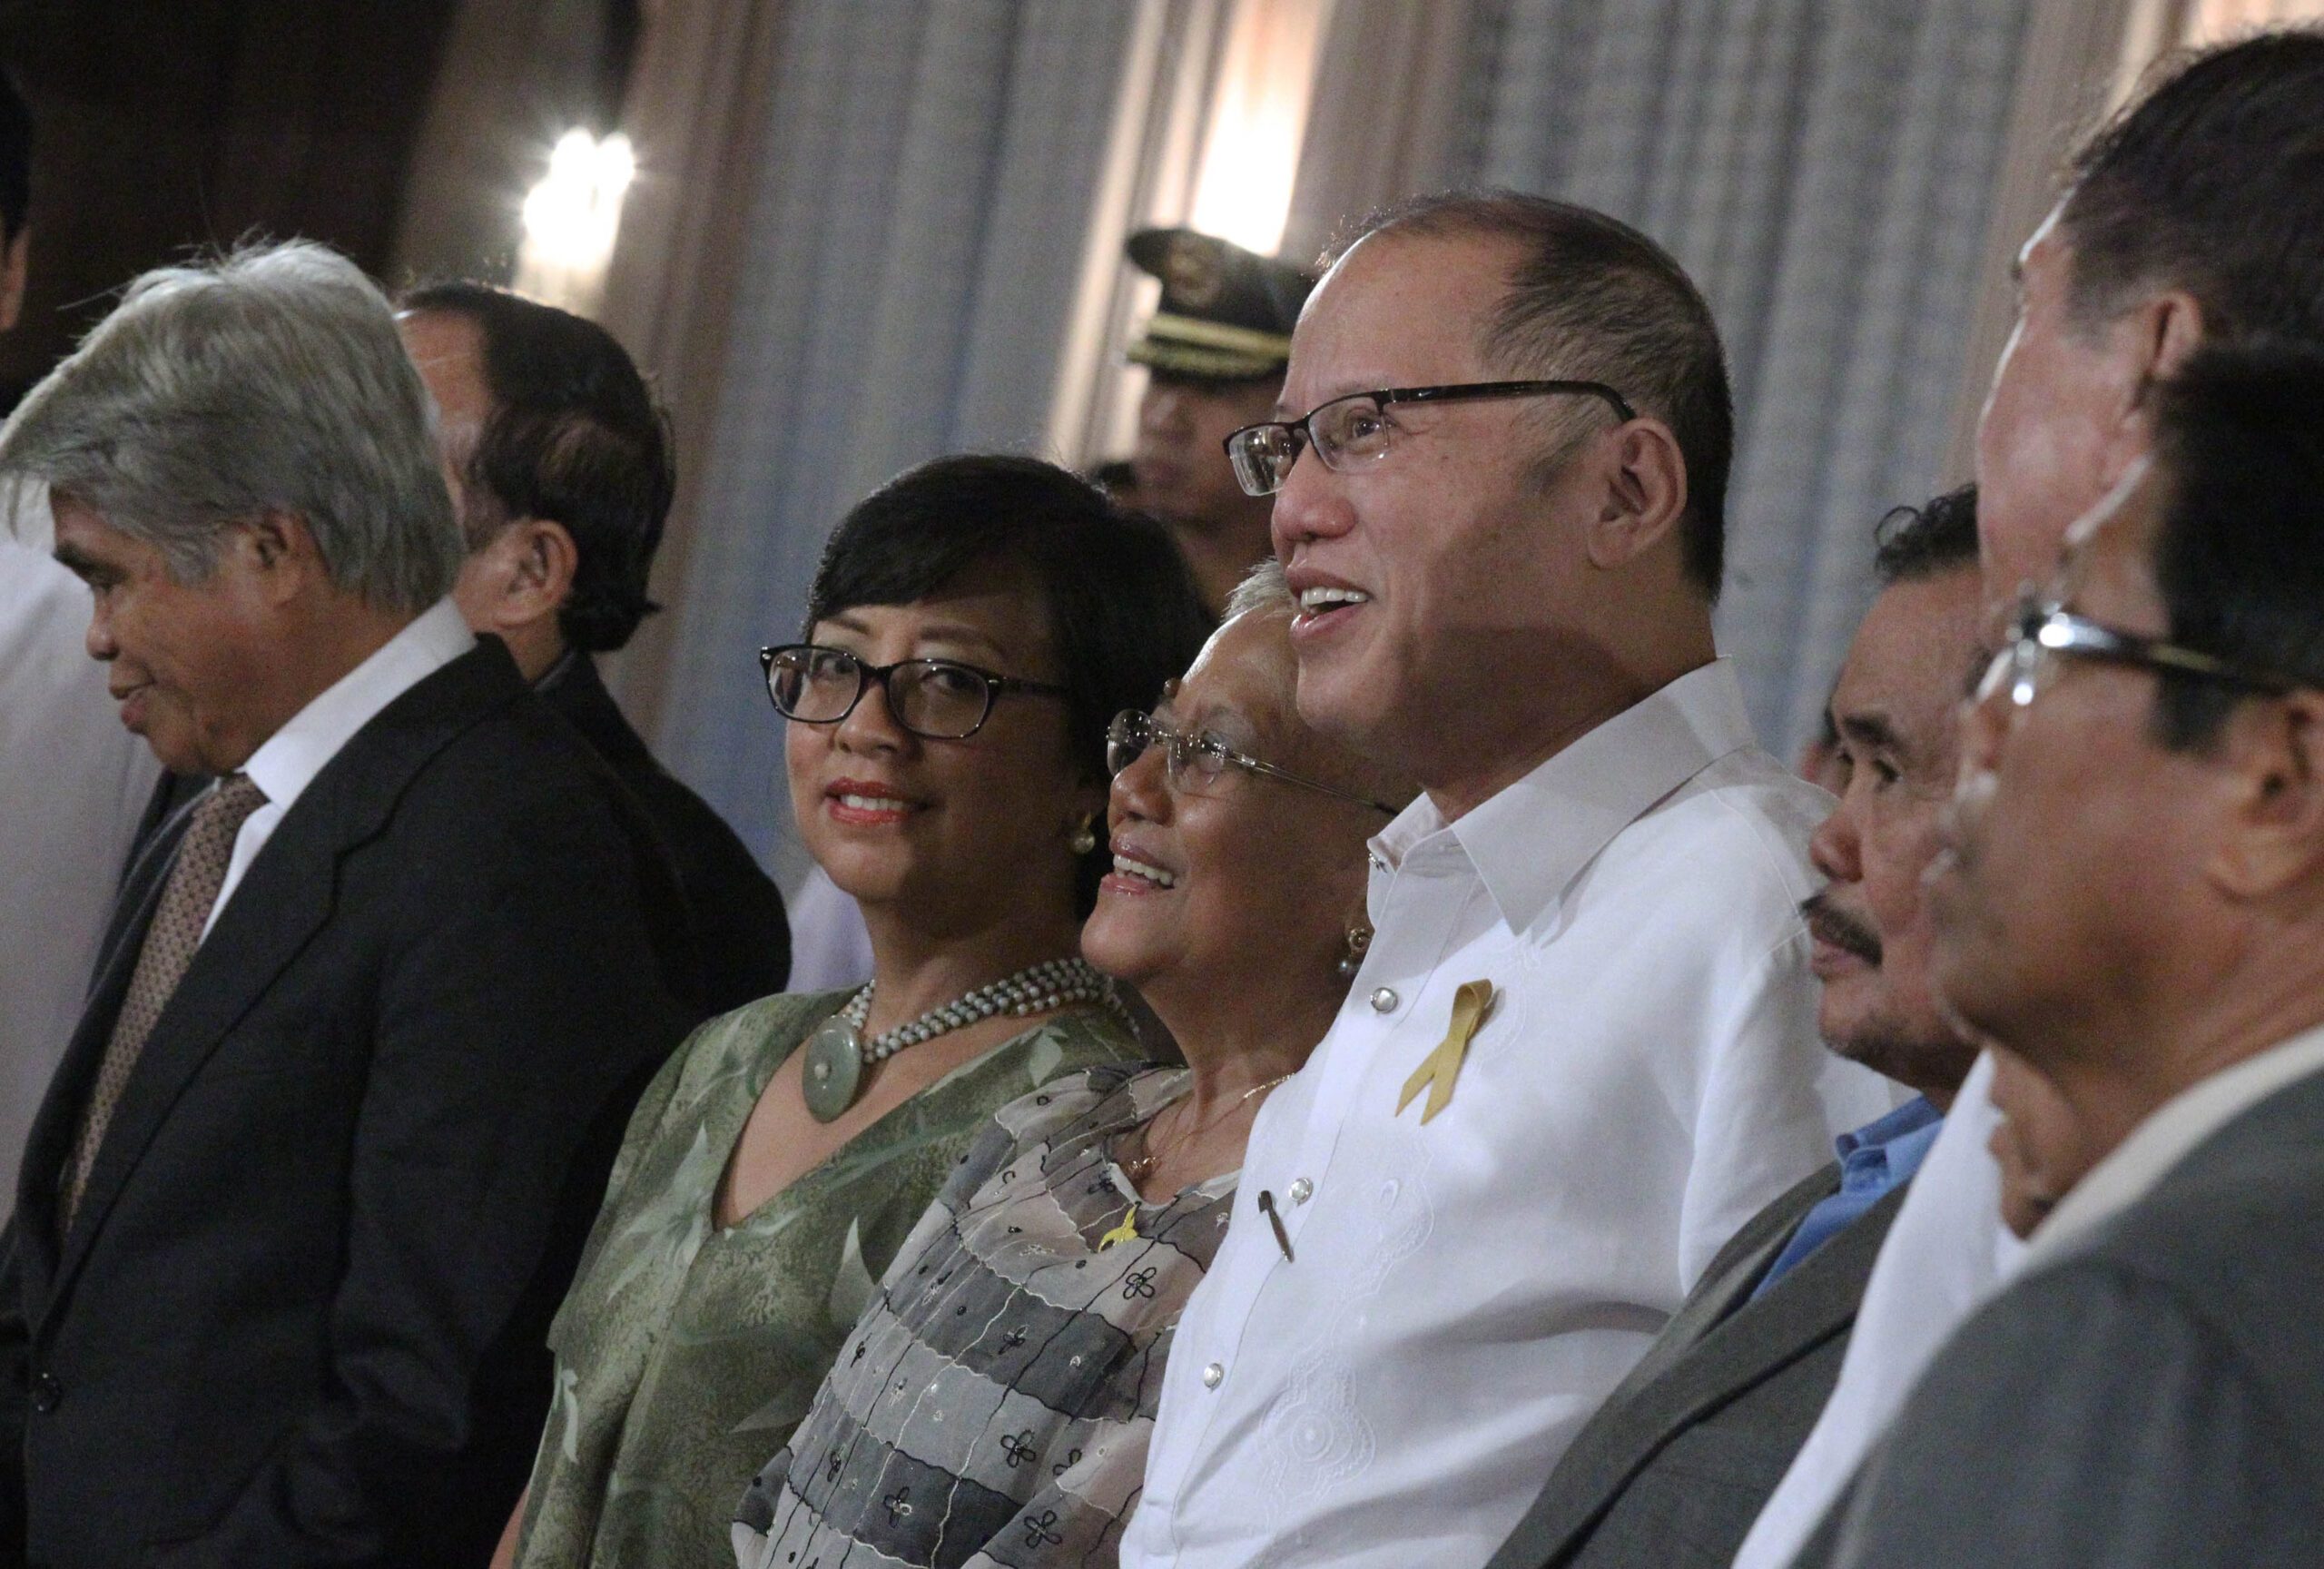 A week before stepping down, Aquino says he’s ‘all smiles’